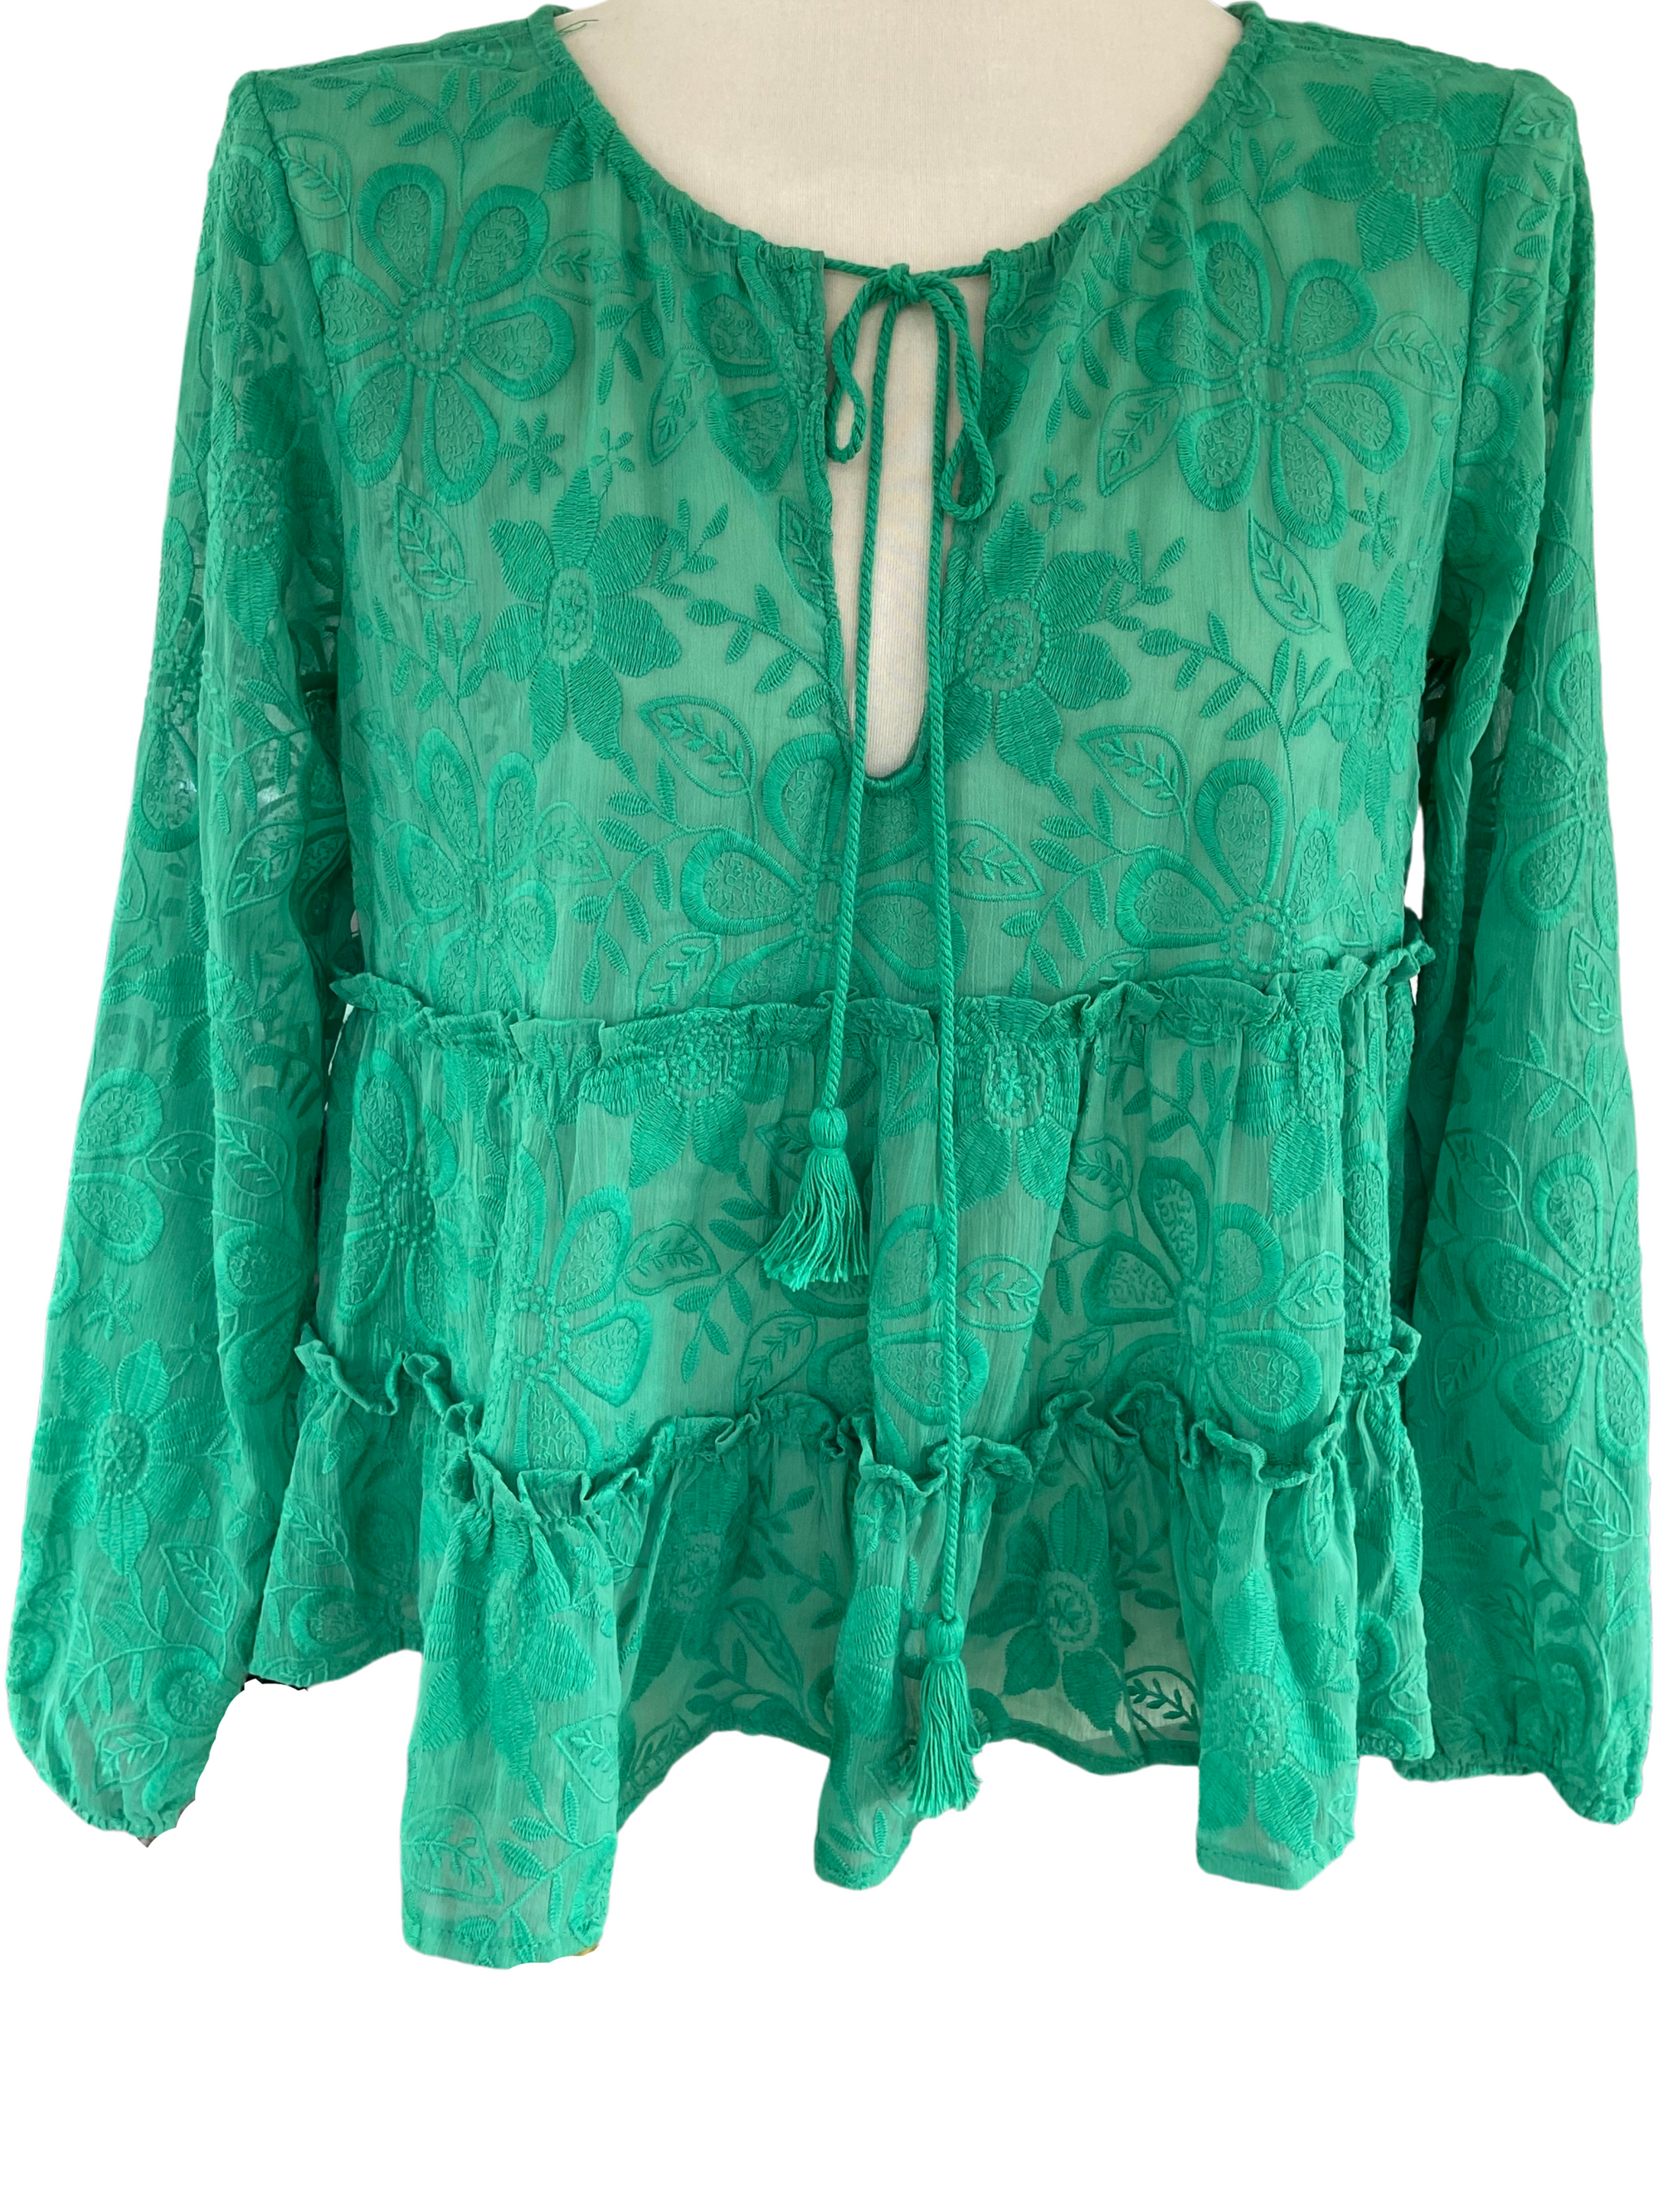 Bright Spring embroidered lace green ruffle top